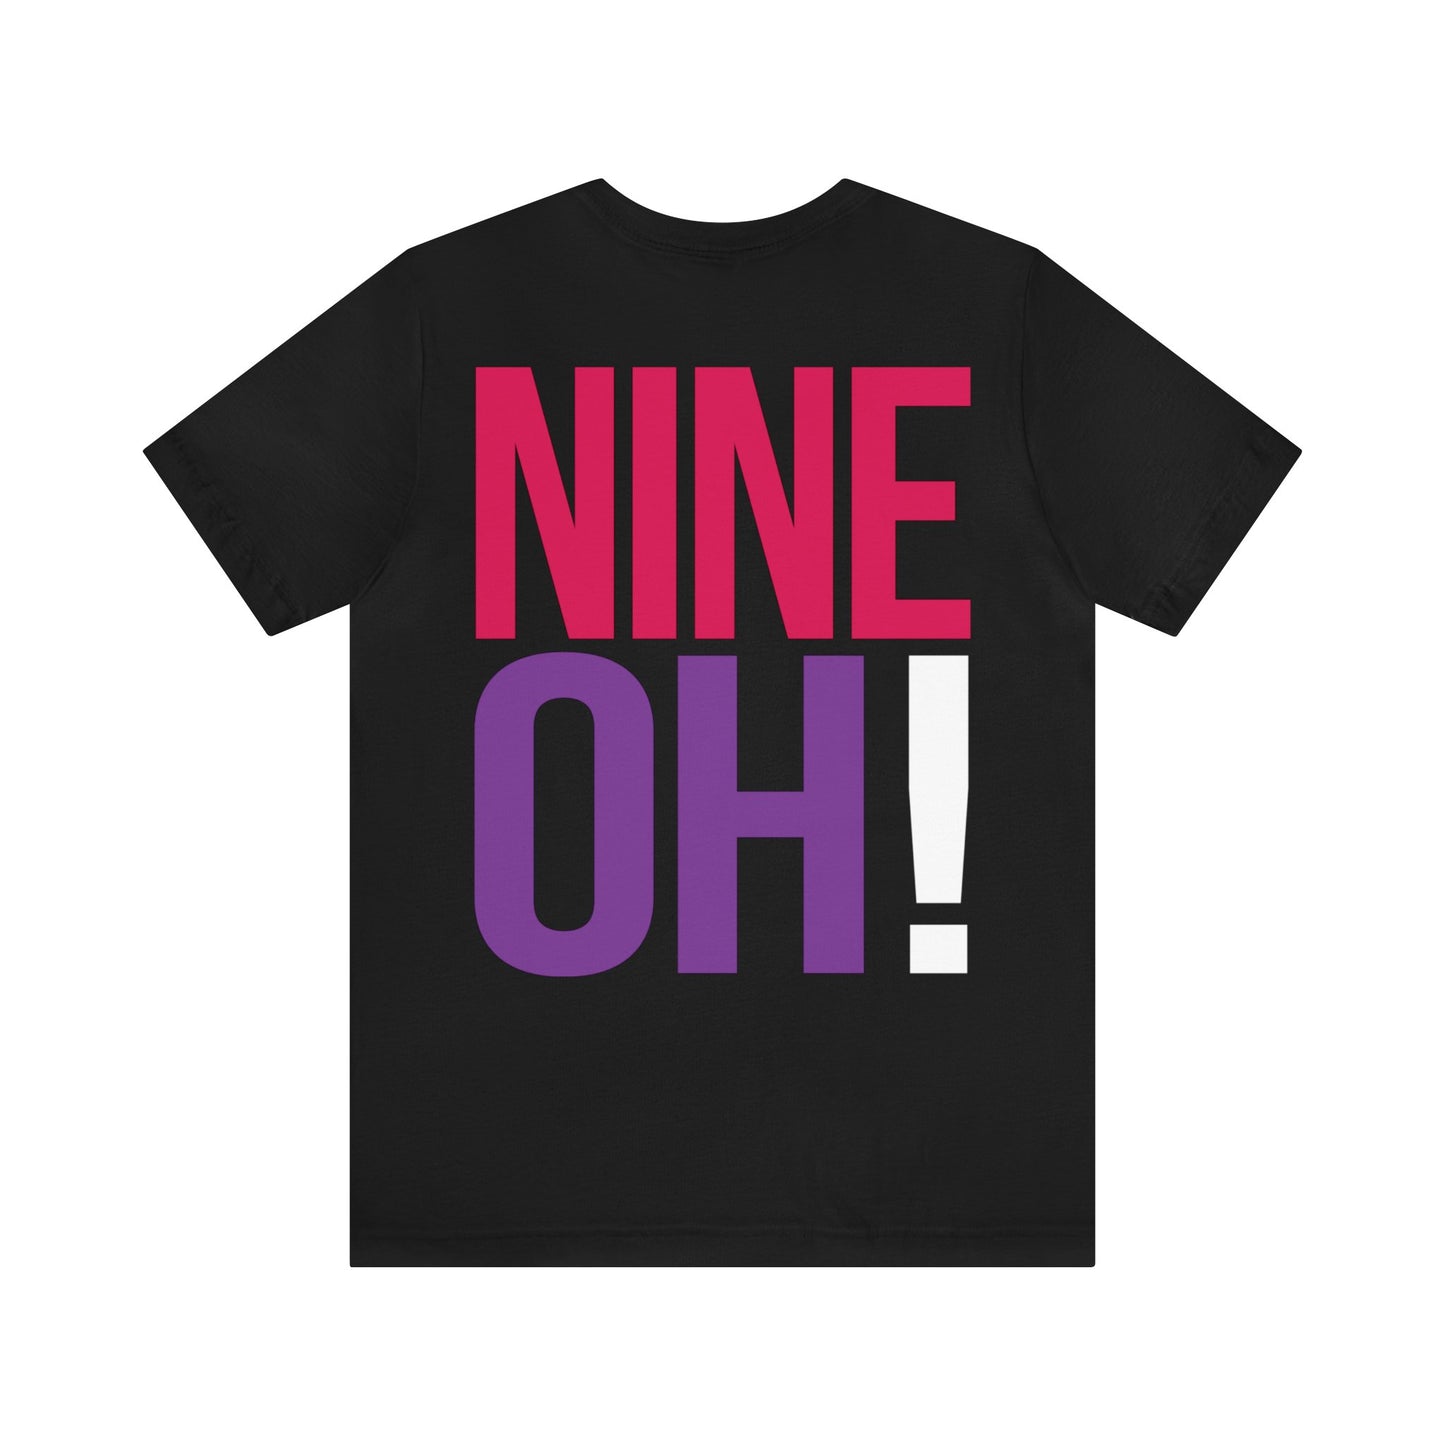 90th Birthday Gift T-shirt, Birthday Song NINE OH! 2-sided, Unisex Bella+Canvas 3001 T-shirt, Dark Colors, Funny Shirt for Surprise Parties